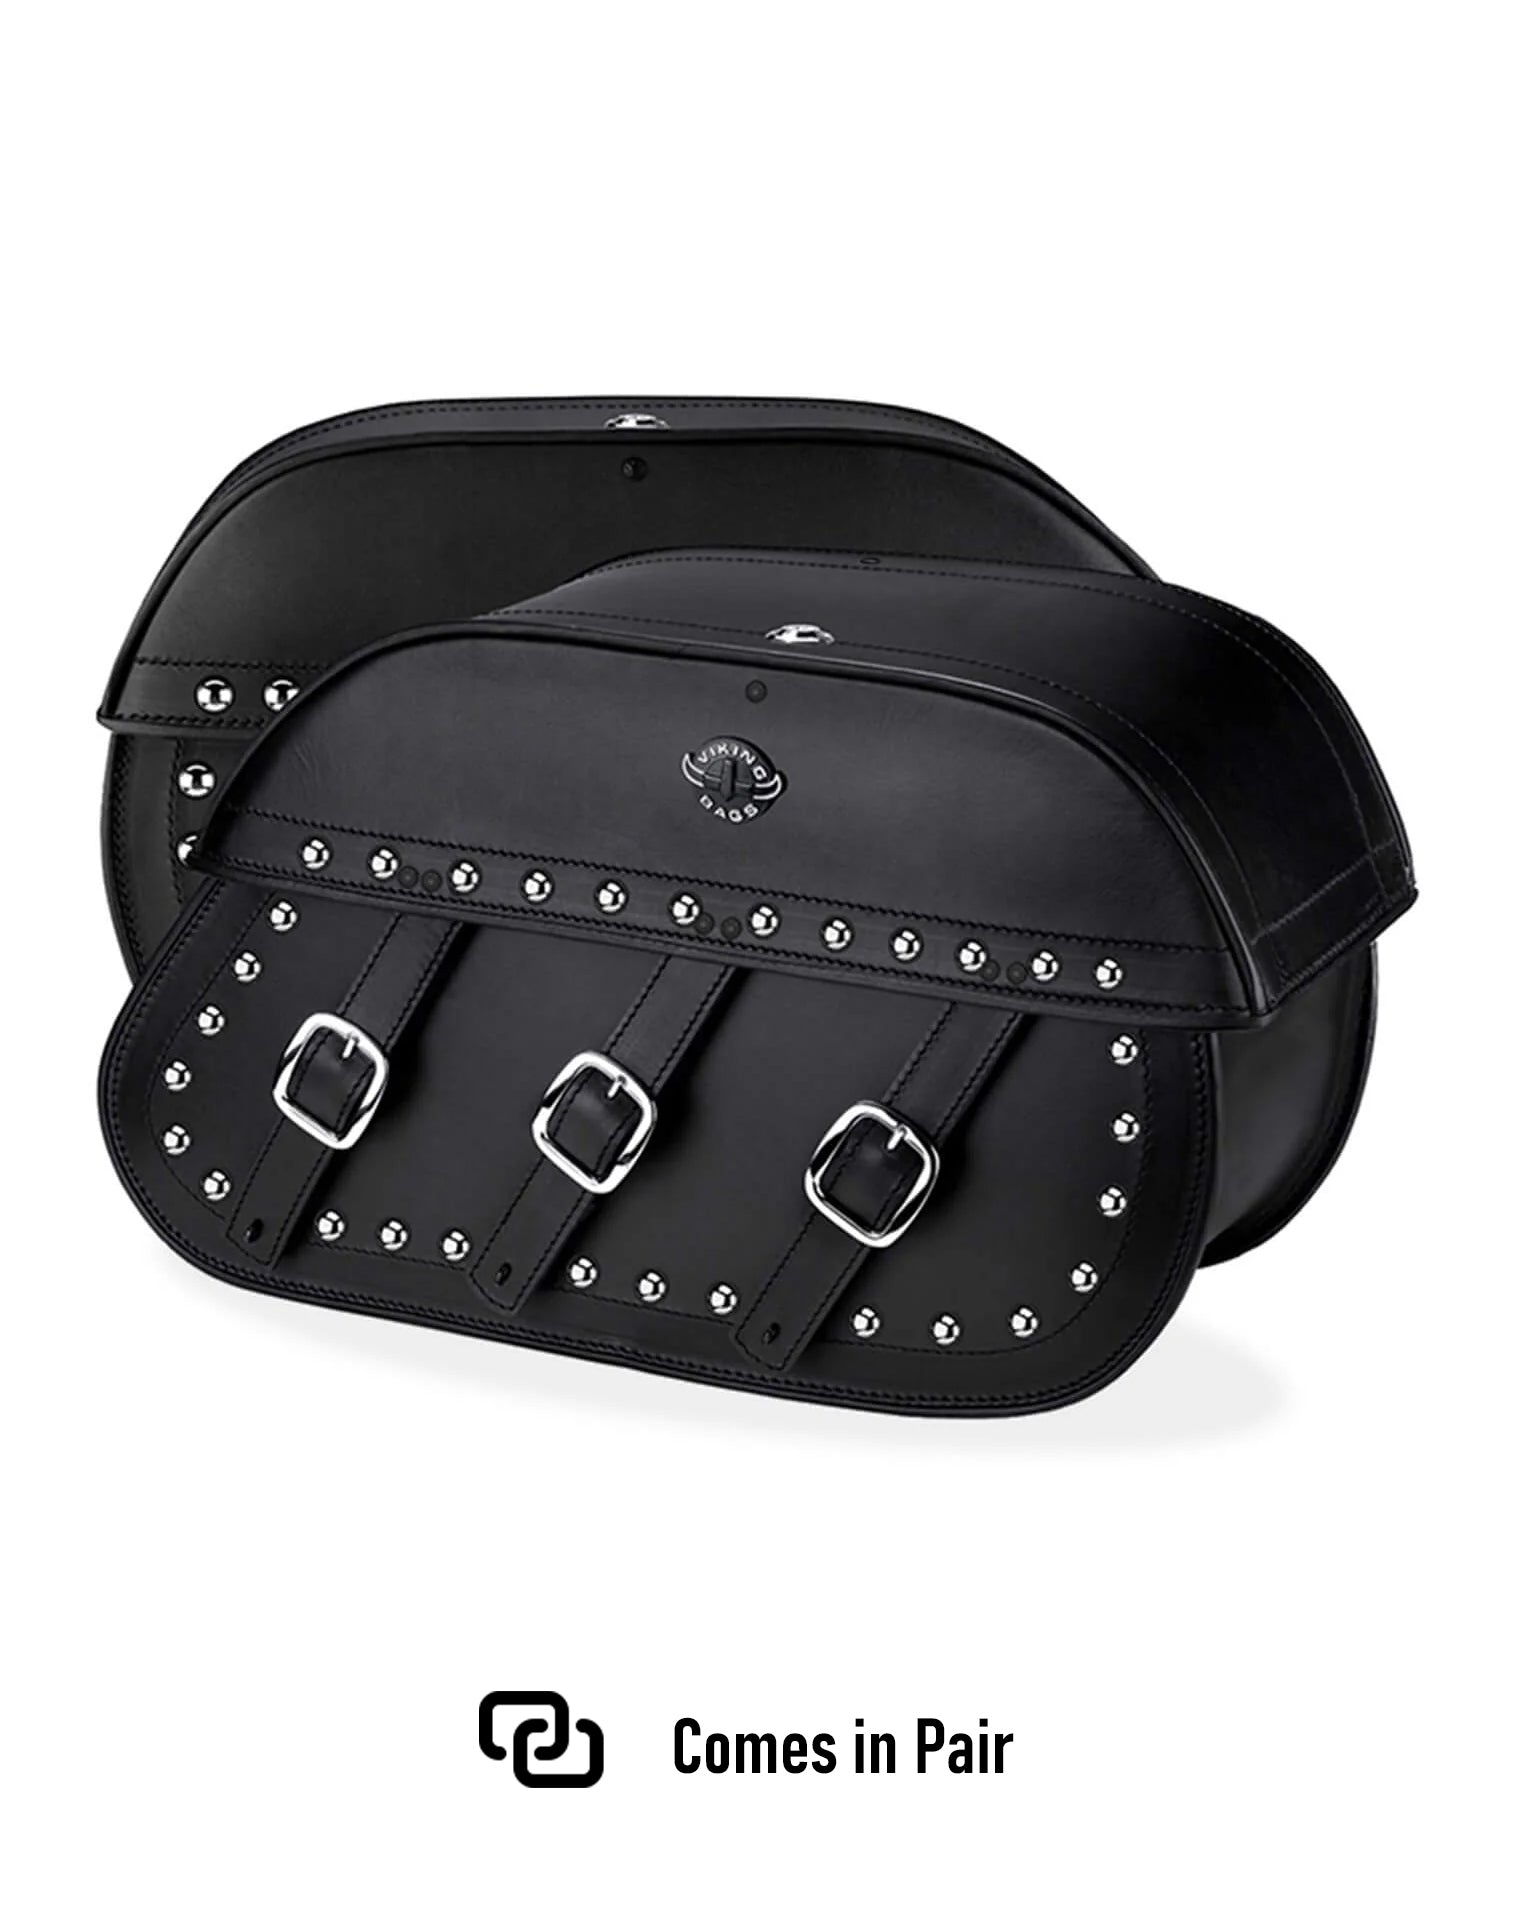 Viking Trianon Extra Large Victory Vegas Studded Leather Motorcycle Saddlebags Weather Resistant Bags Comes in Pair